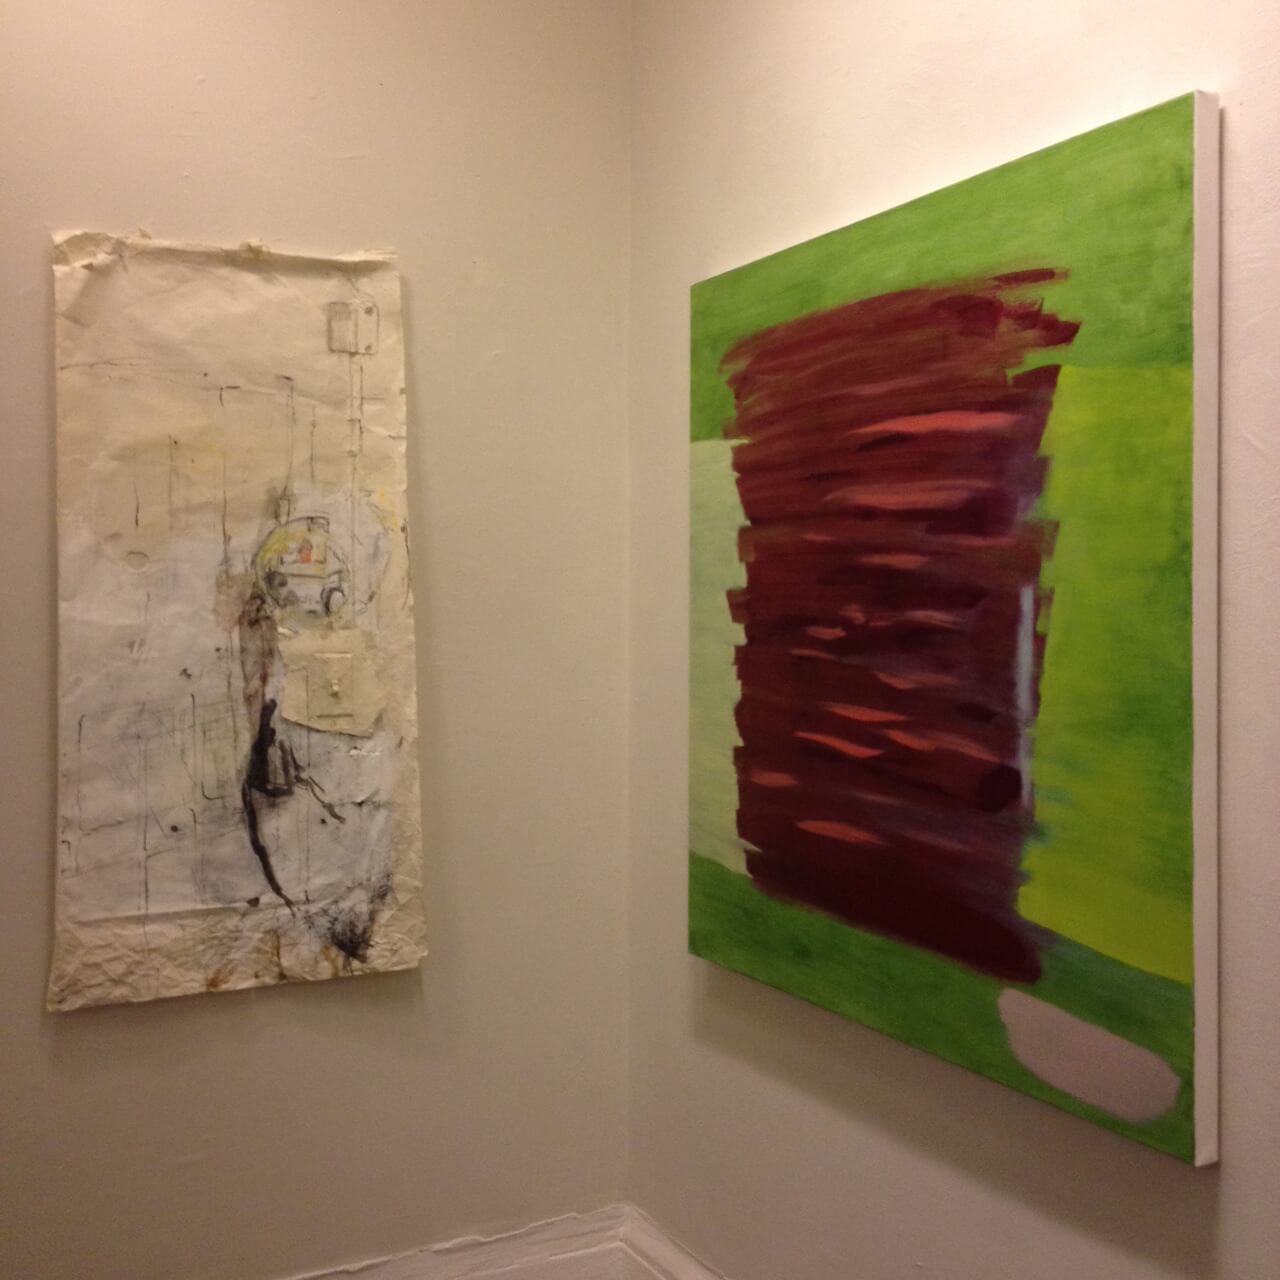 Left to right: Works by Laura Jacobs and David Longwell in one of the rooms curated by Jason Andrew.